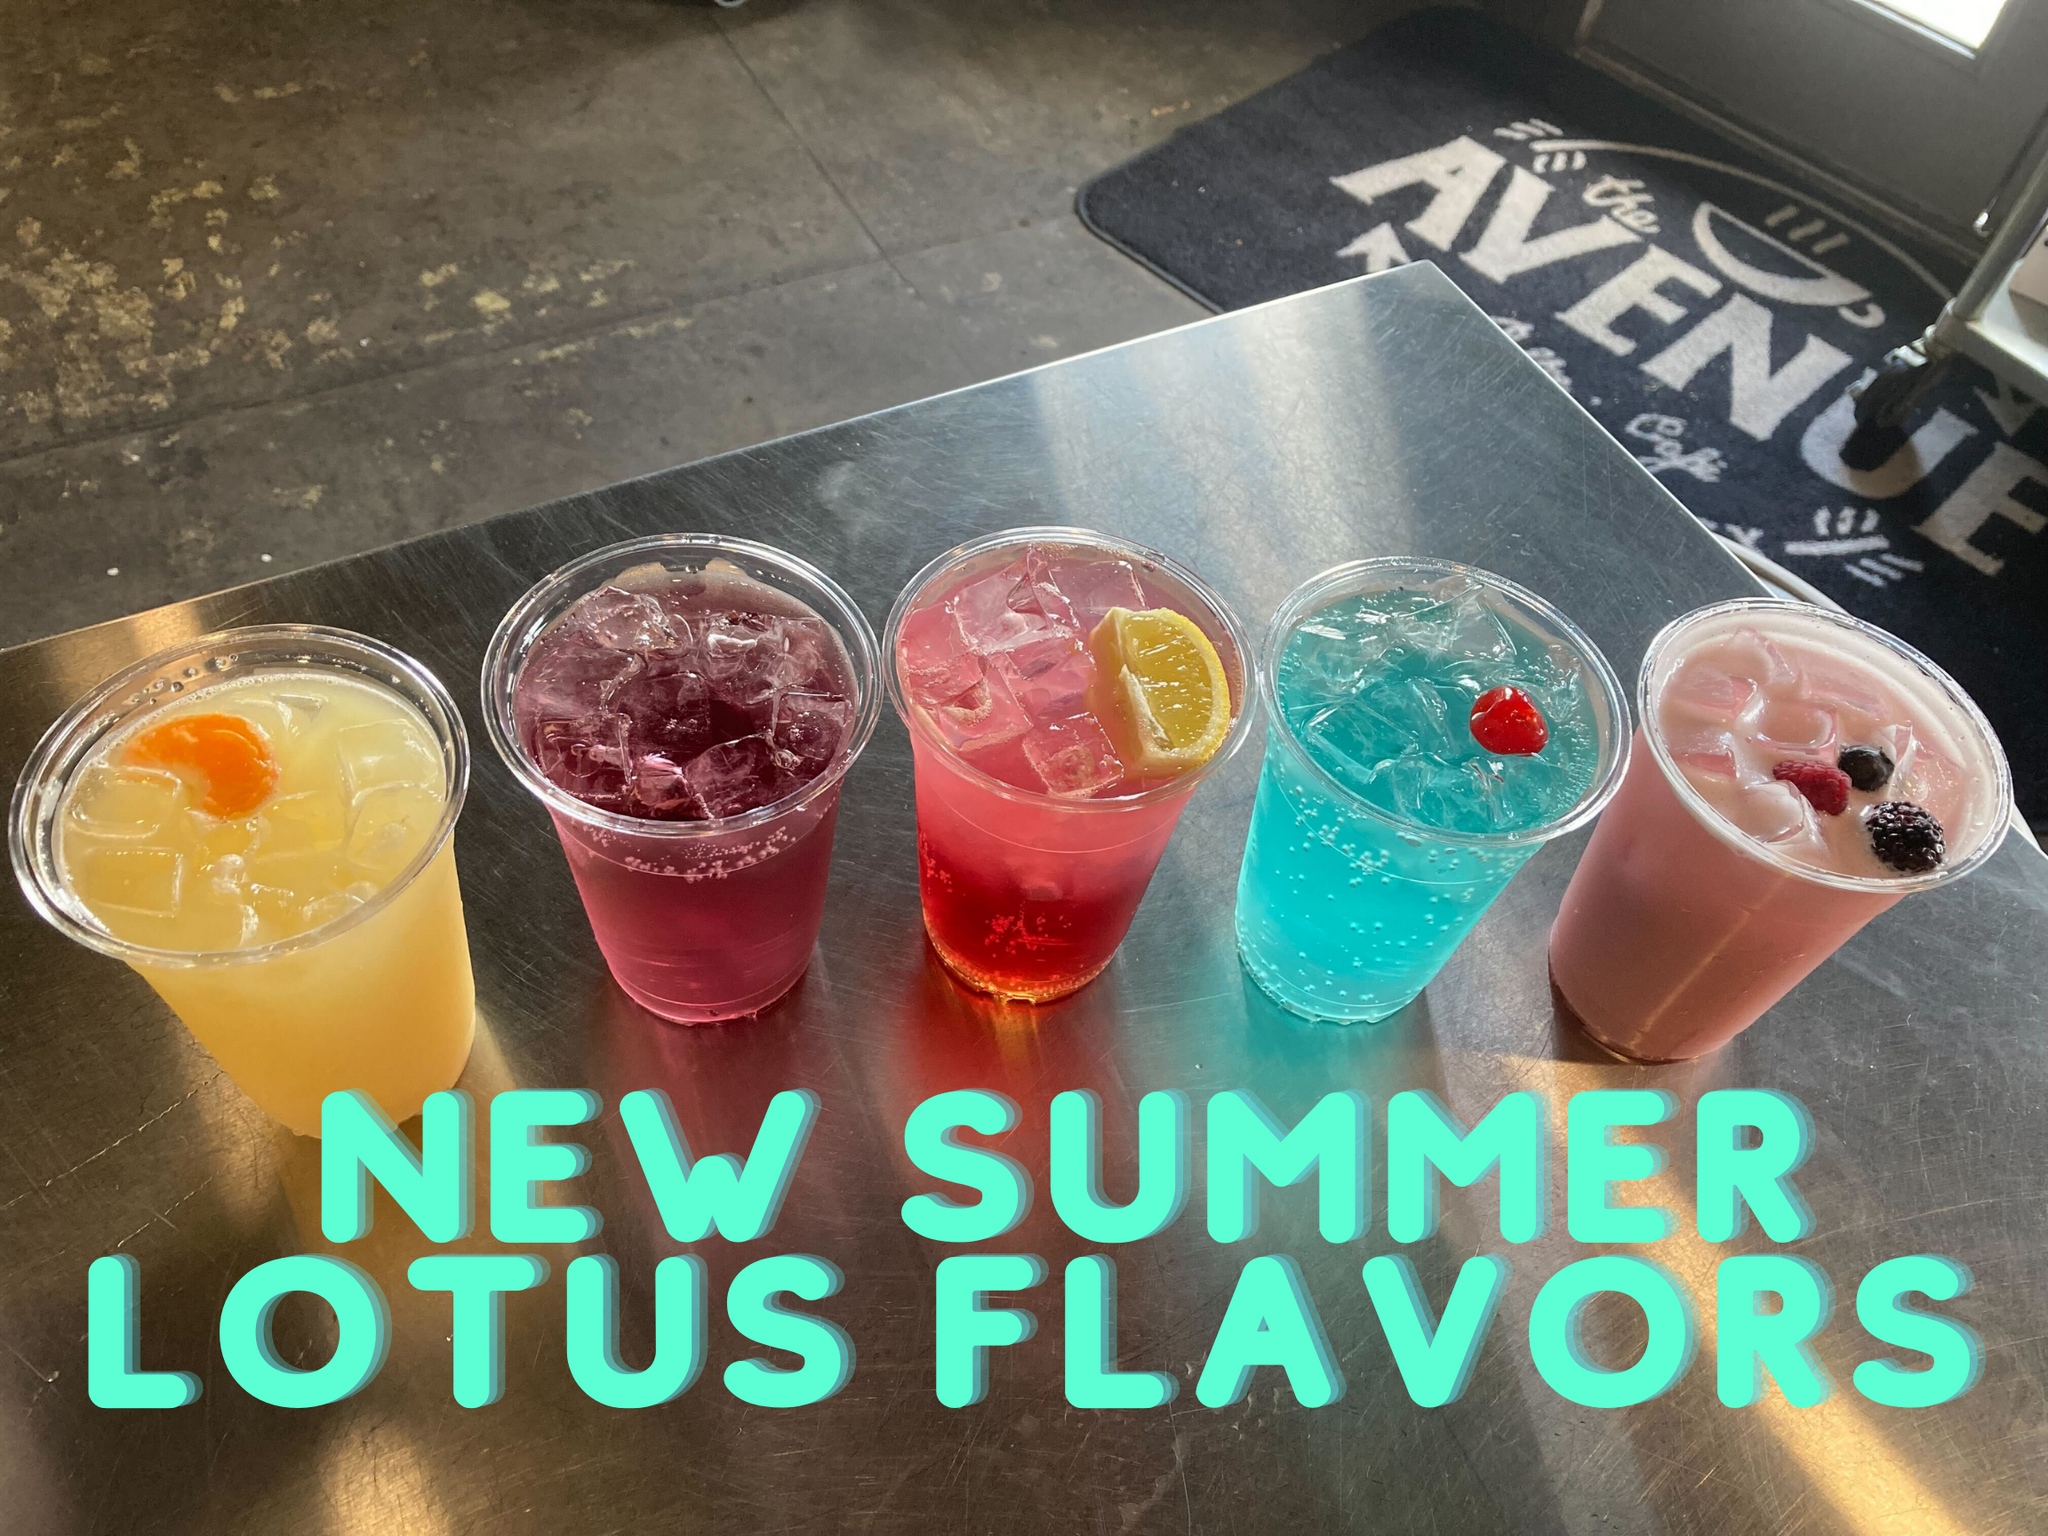 Get Energized with our Summer Lotus menu & other limited treats!